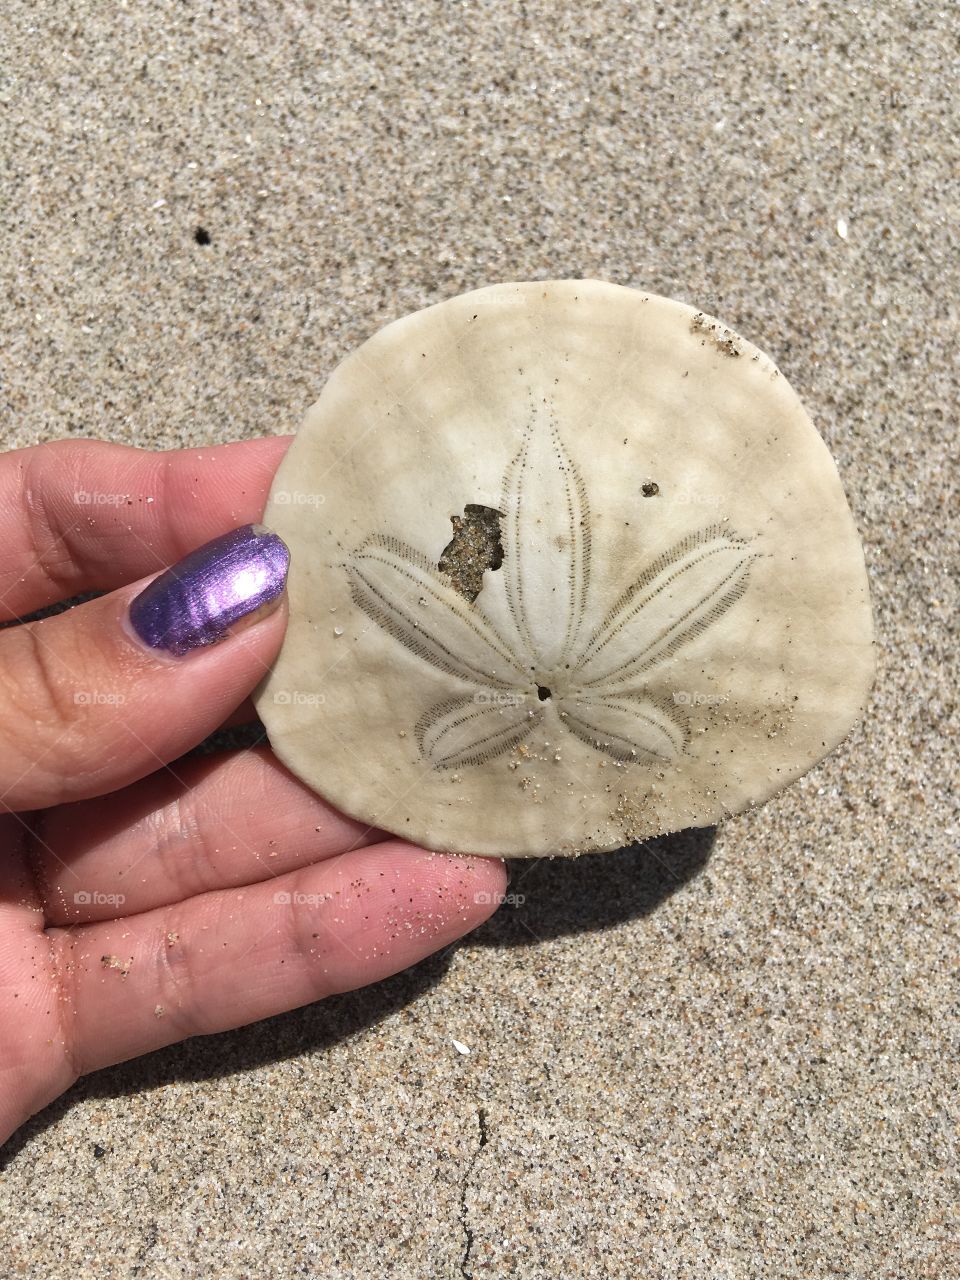 Love finding sand dollars at the beach! 